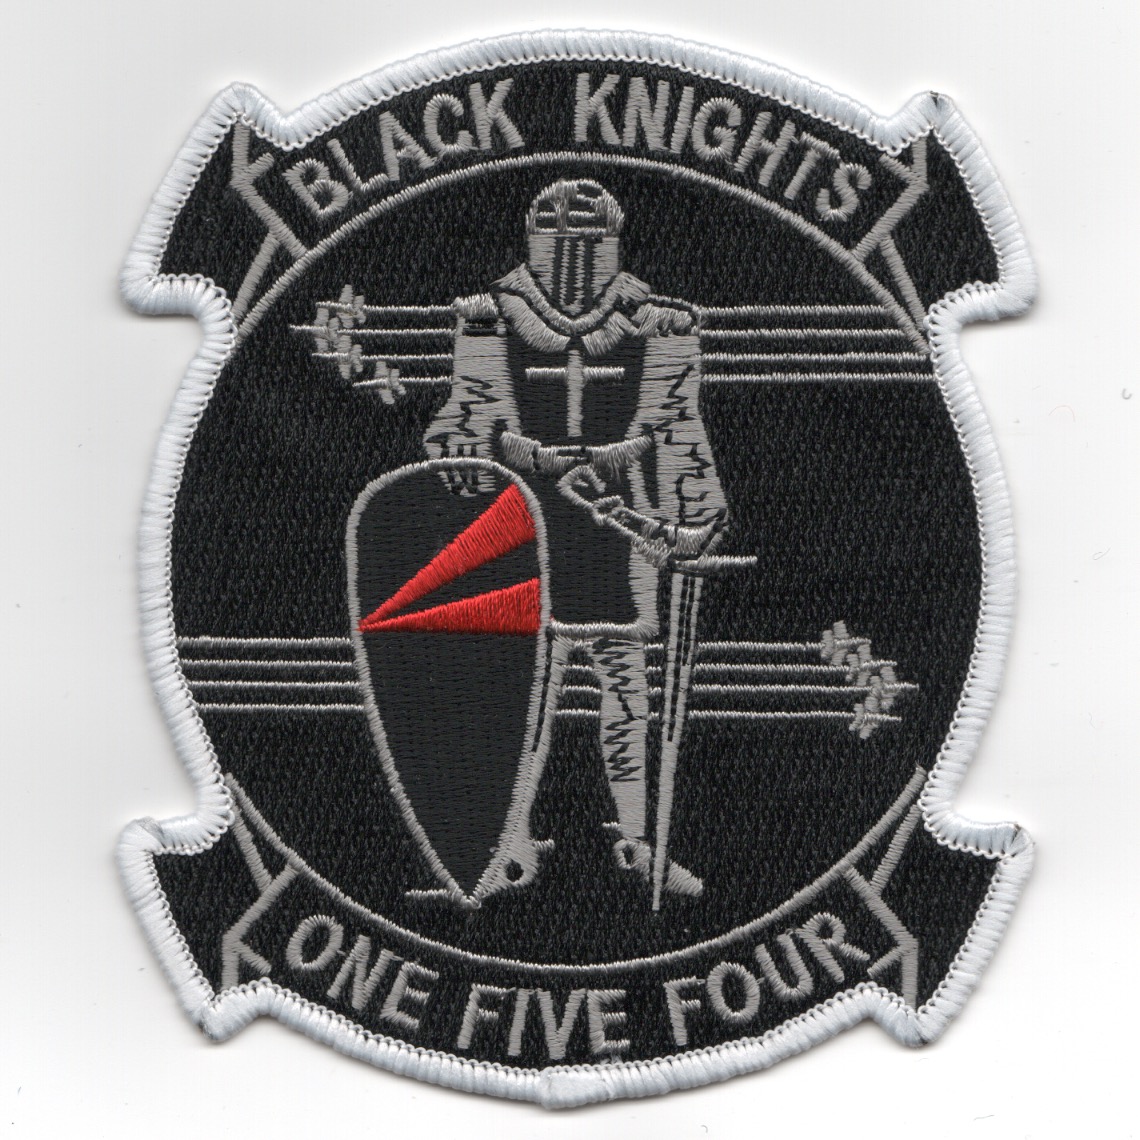 VF-154 Squadron Patch (White on Gray)